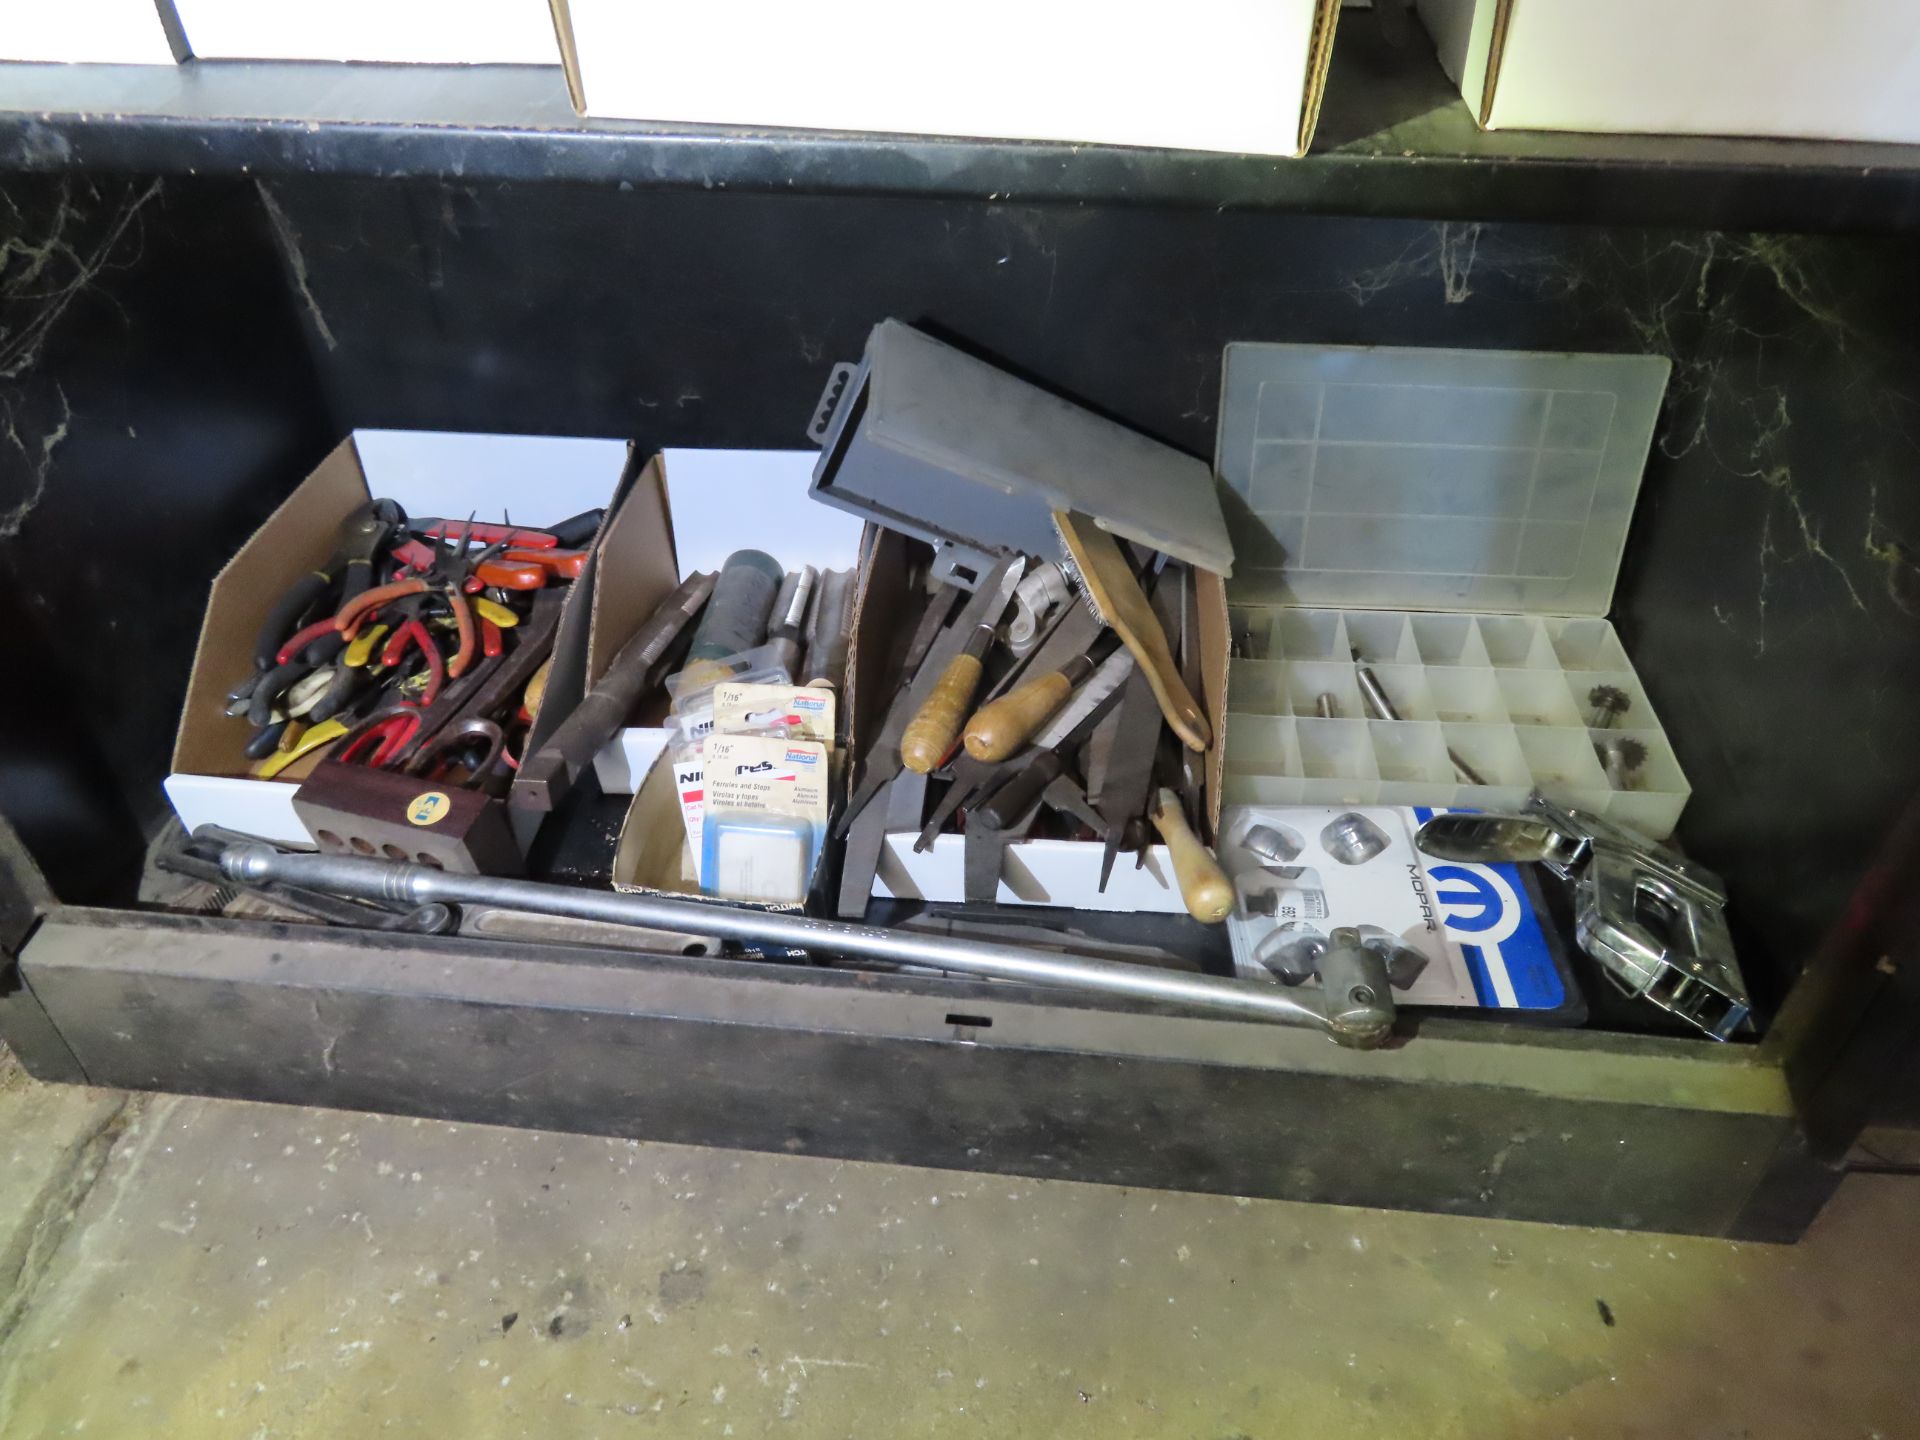 Metal Cabinet and Tooling Contents, Collets, Wrenches, Files, Drill Sets, Chucks, &d Other Tooling - Bild 7 aus 7